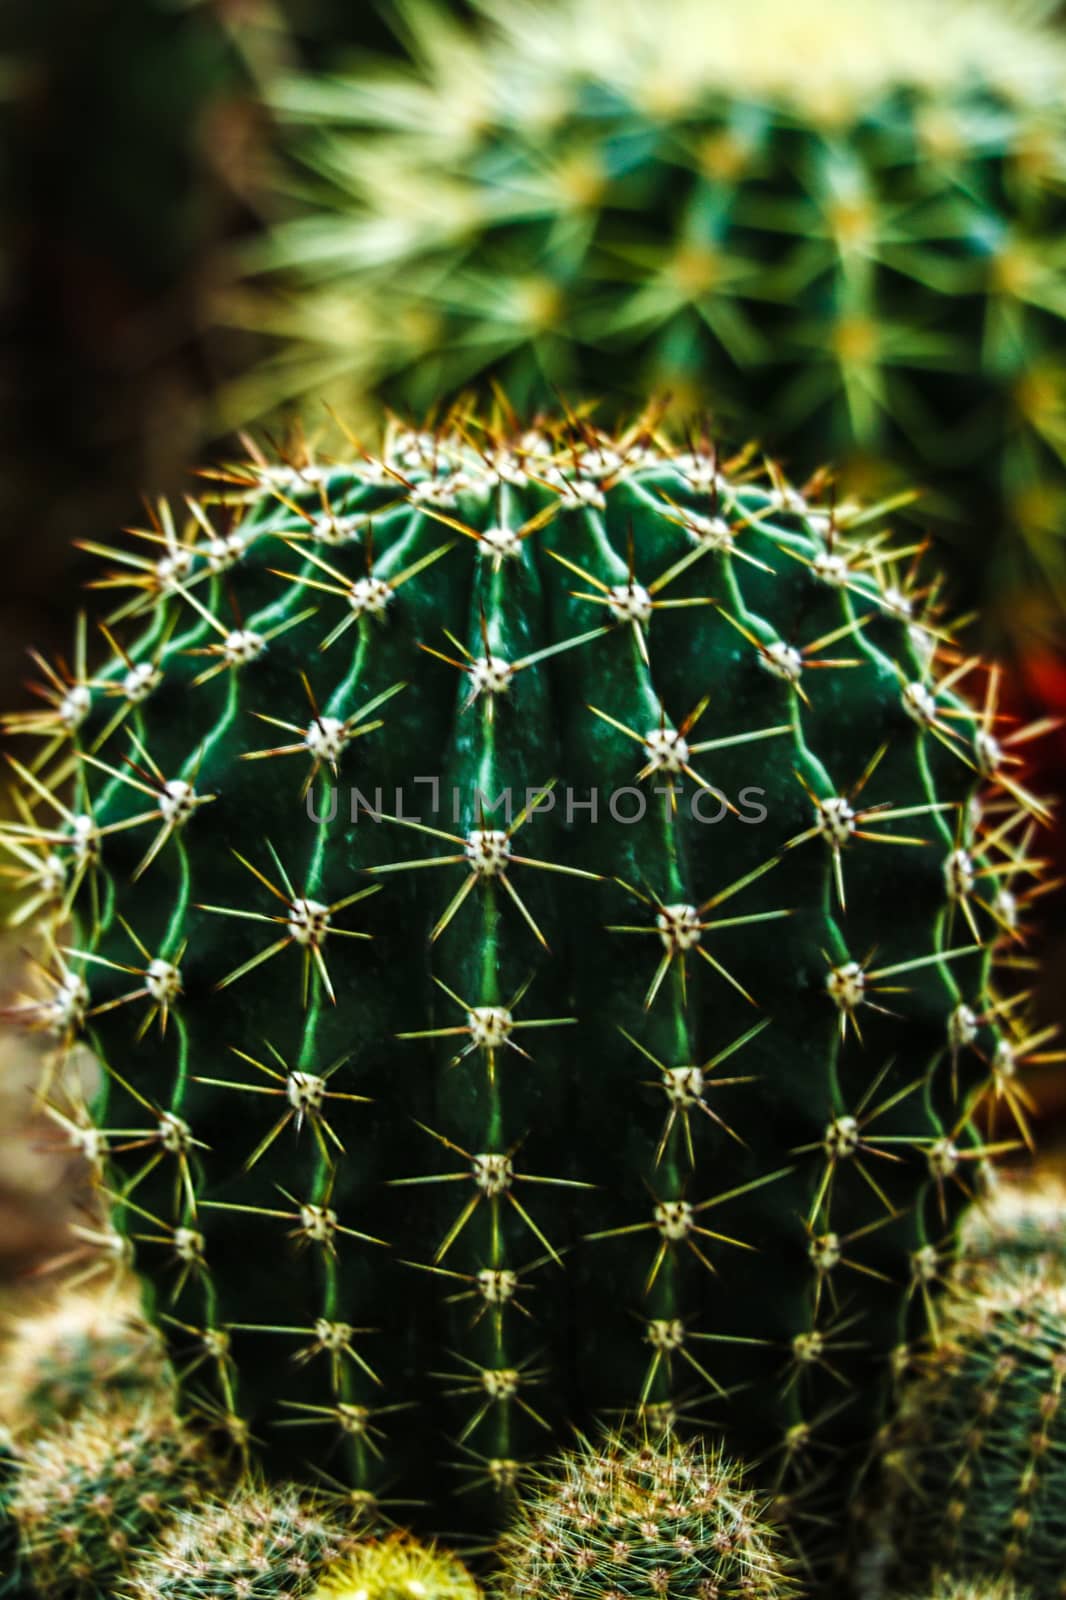 thorn cactus texture background, close up. background by kip02kas